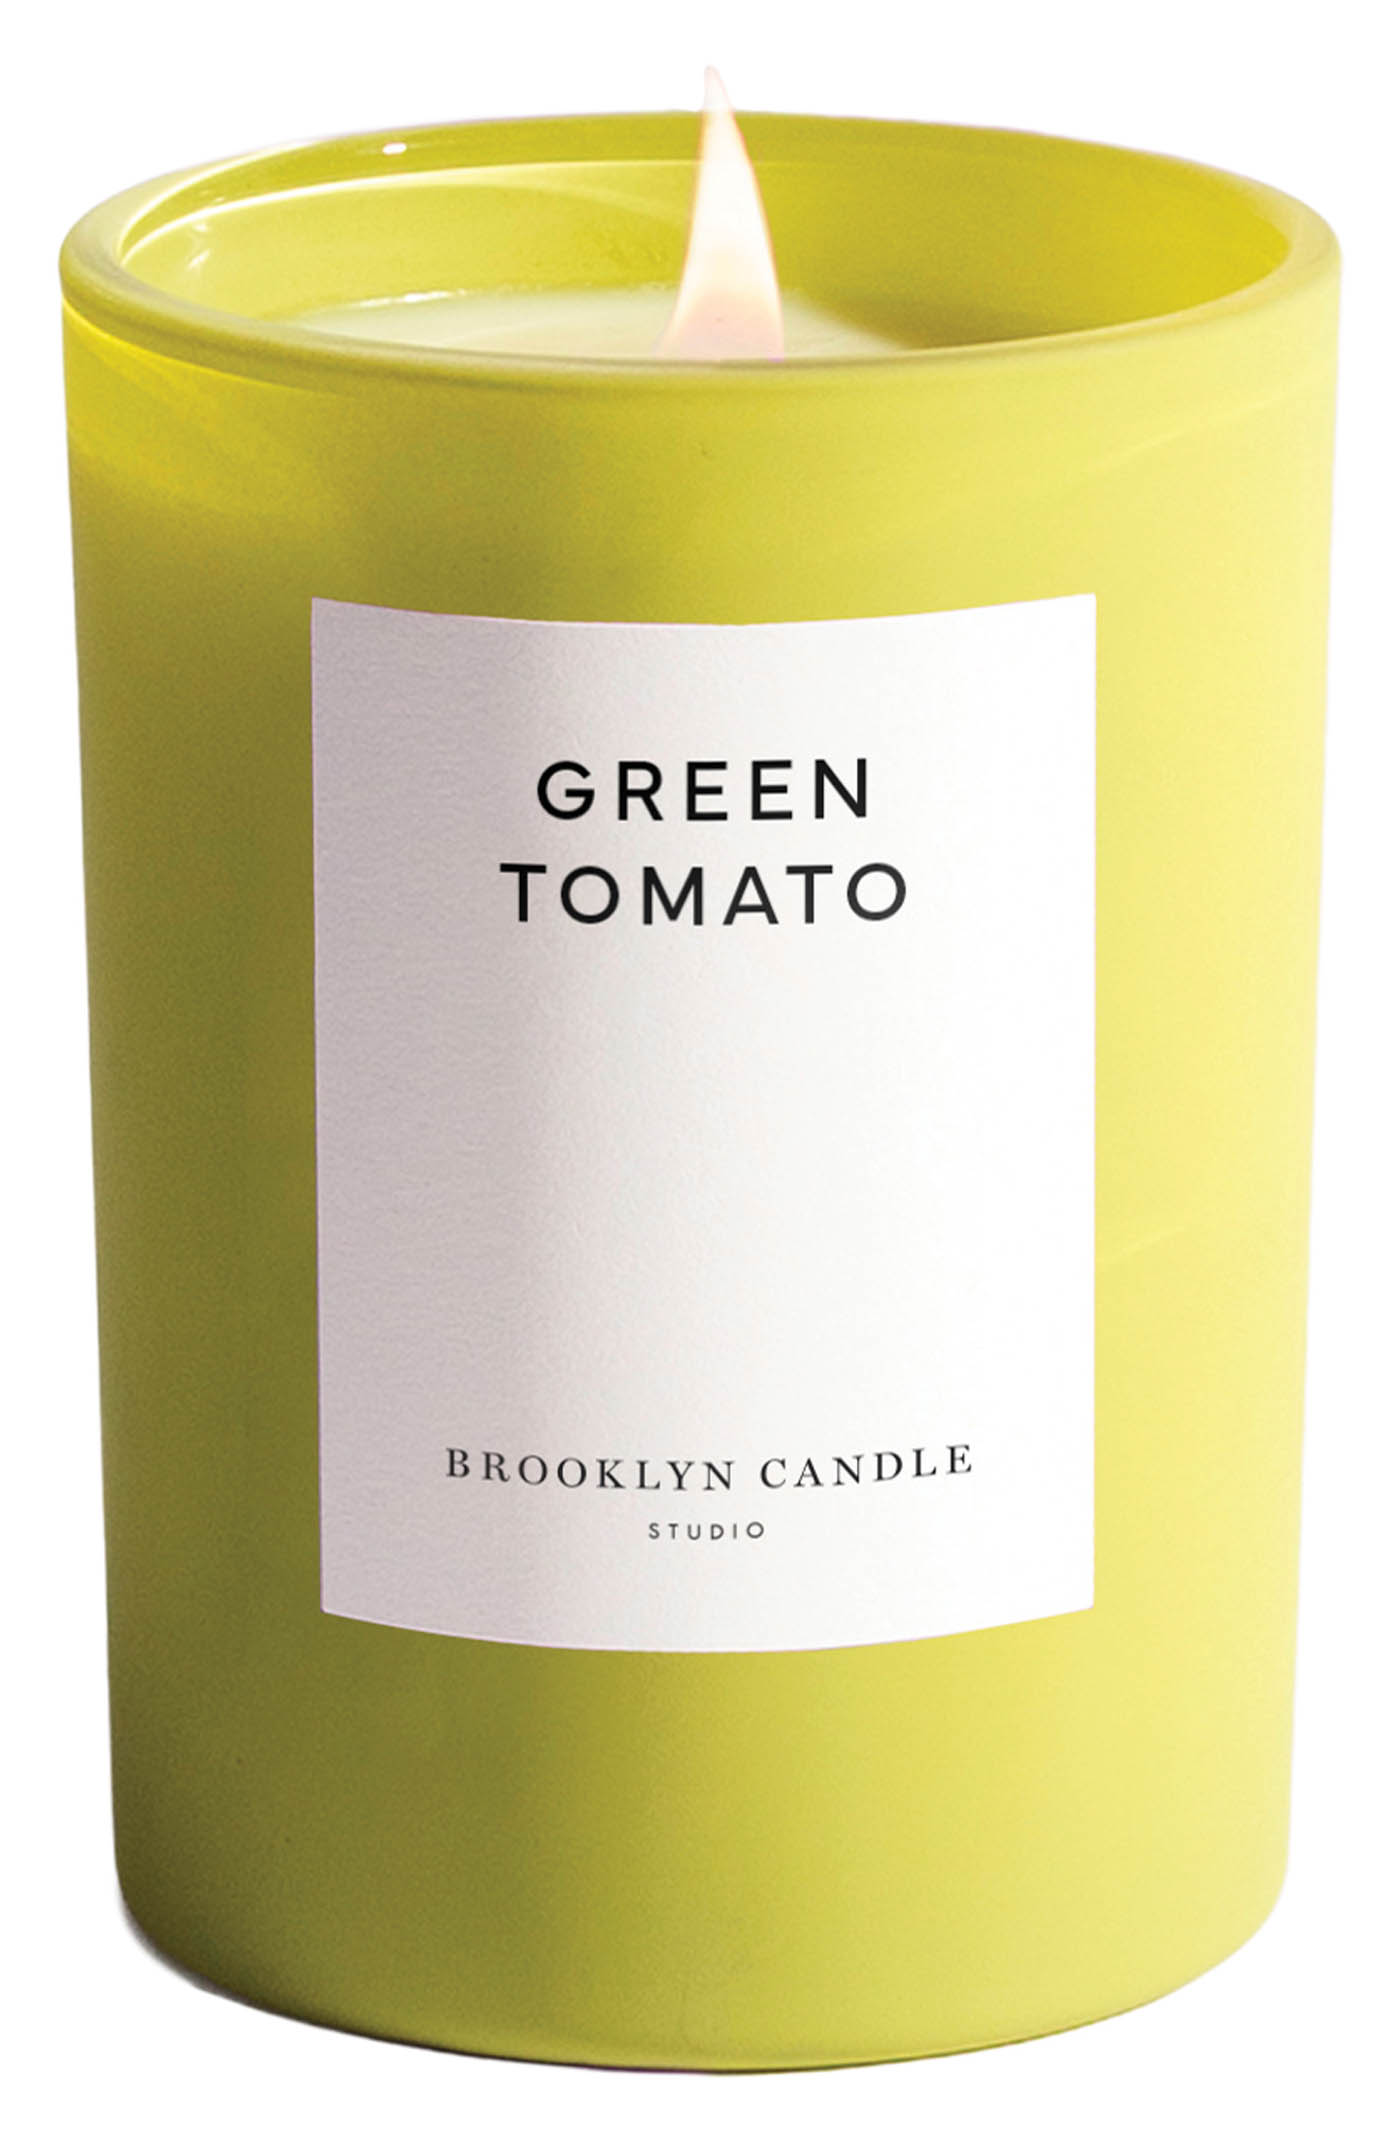 70 Brooklyn Candle, Green Tomato Candle, Nordstrom.com